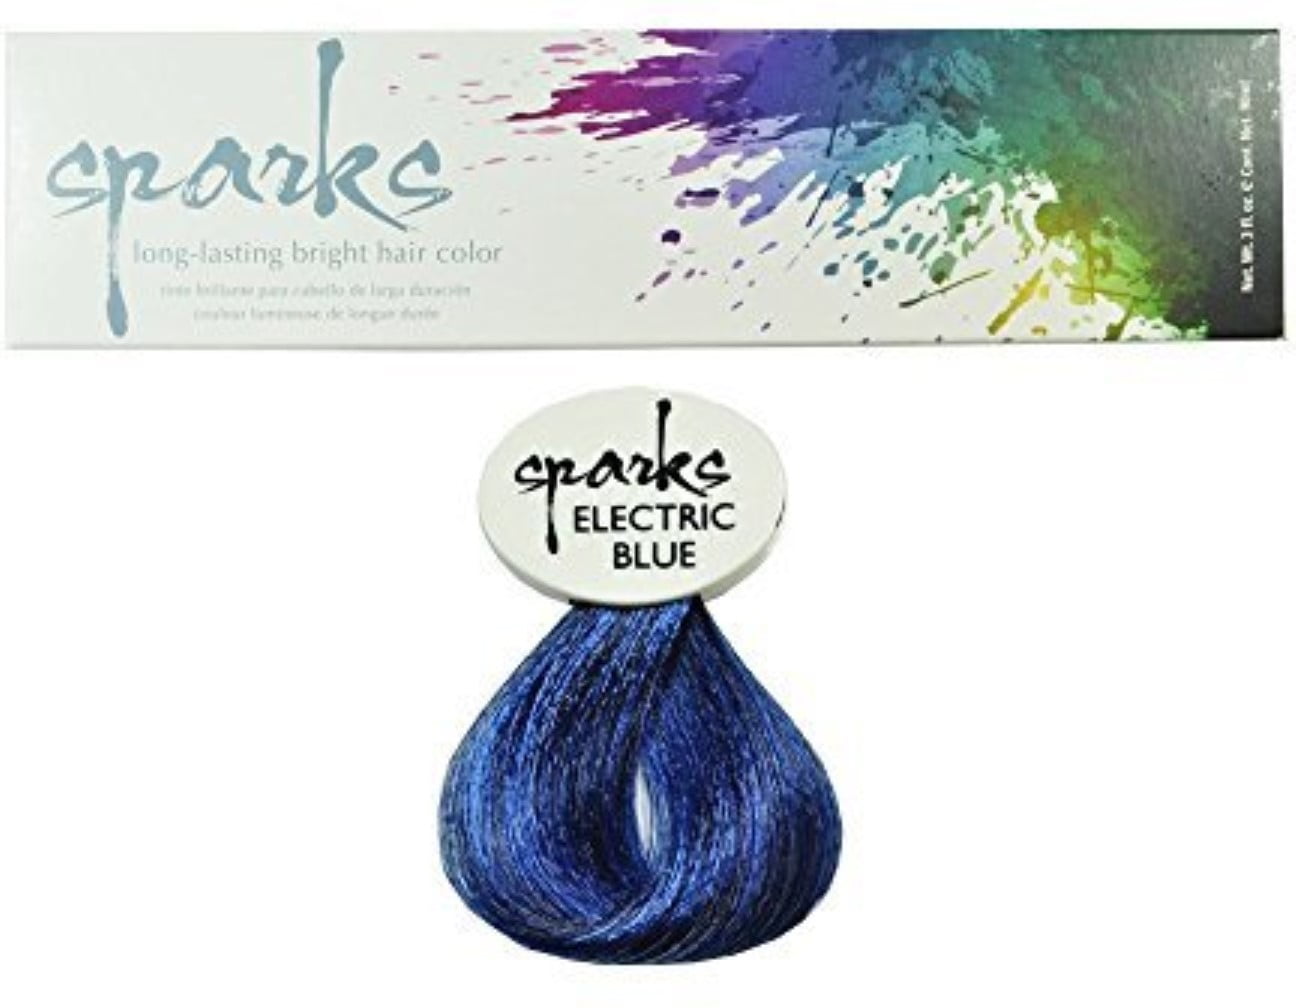 Sparks Long Lasting Bright Hair Color, Electric Blue - wide 4